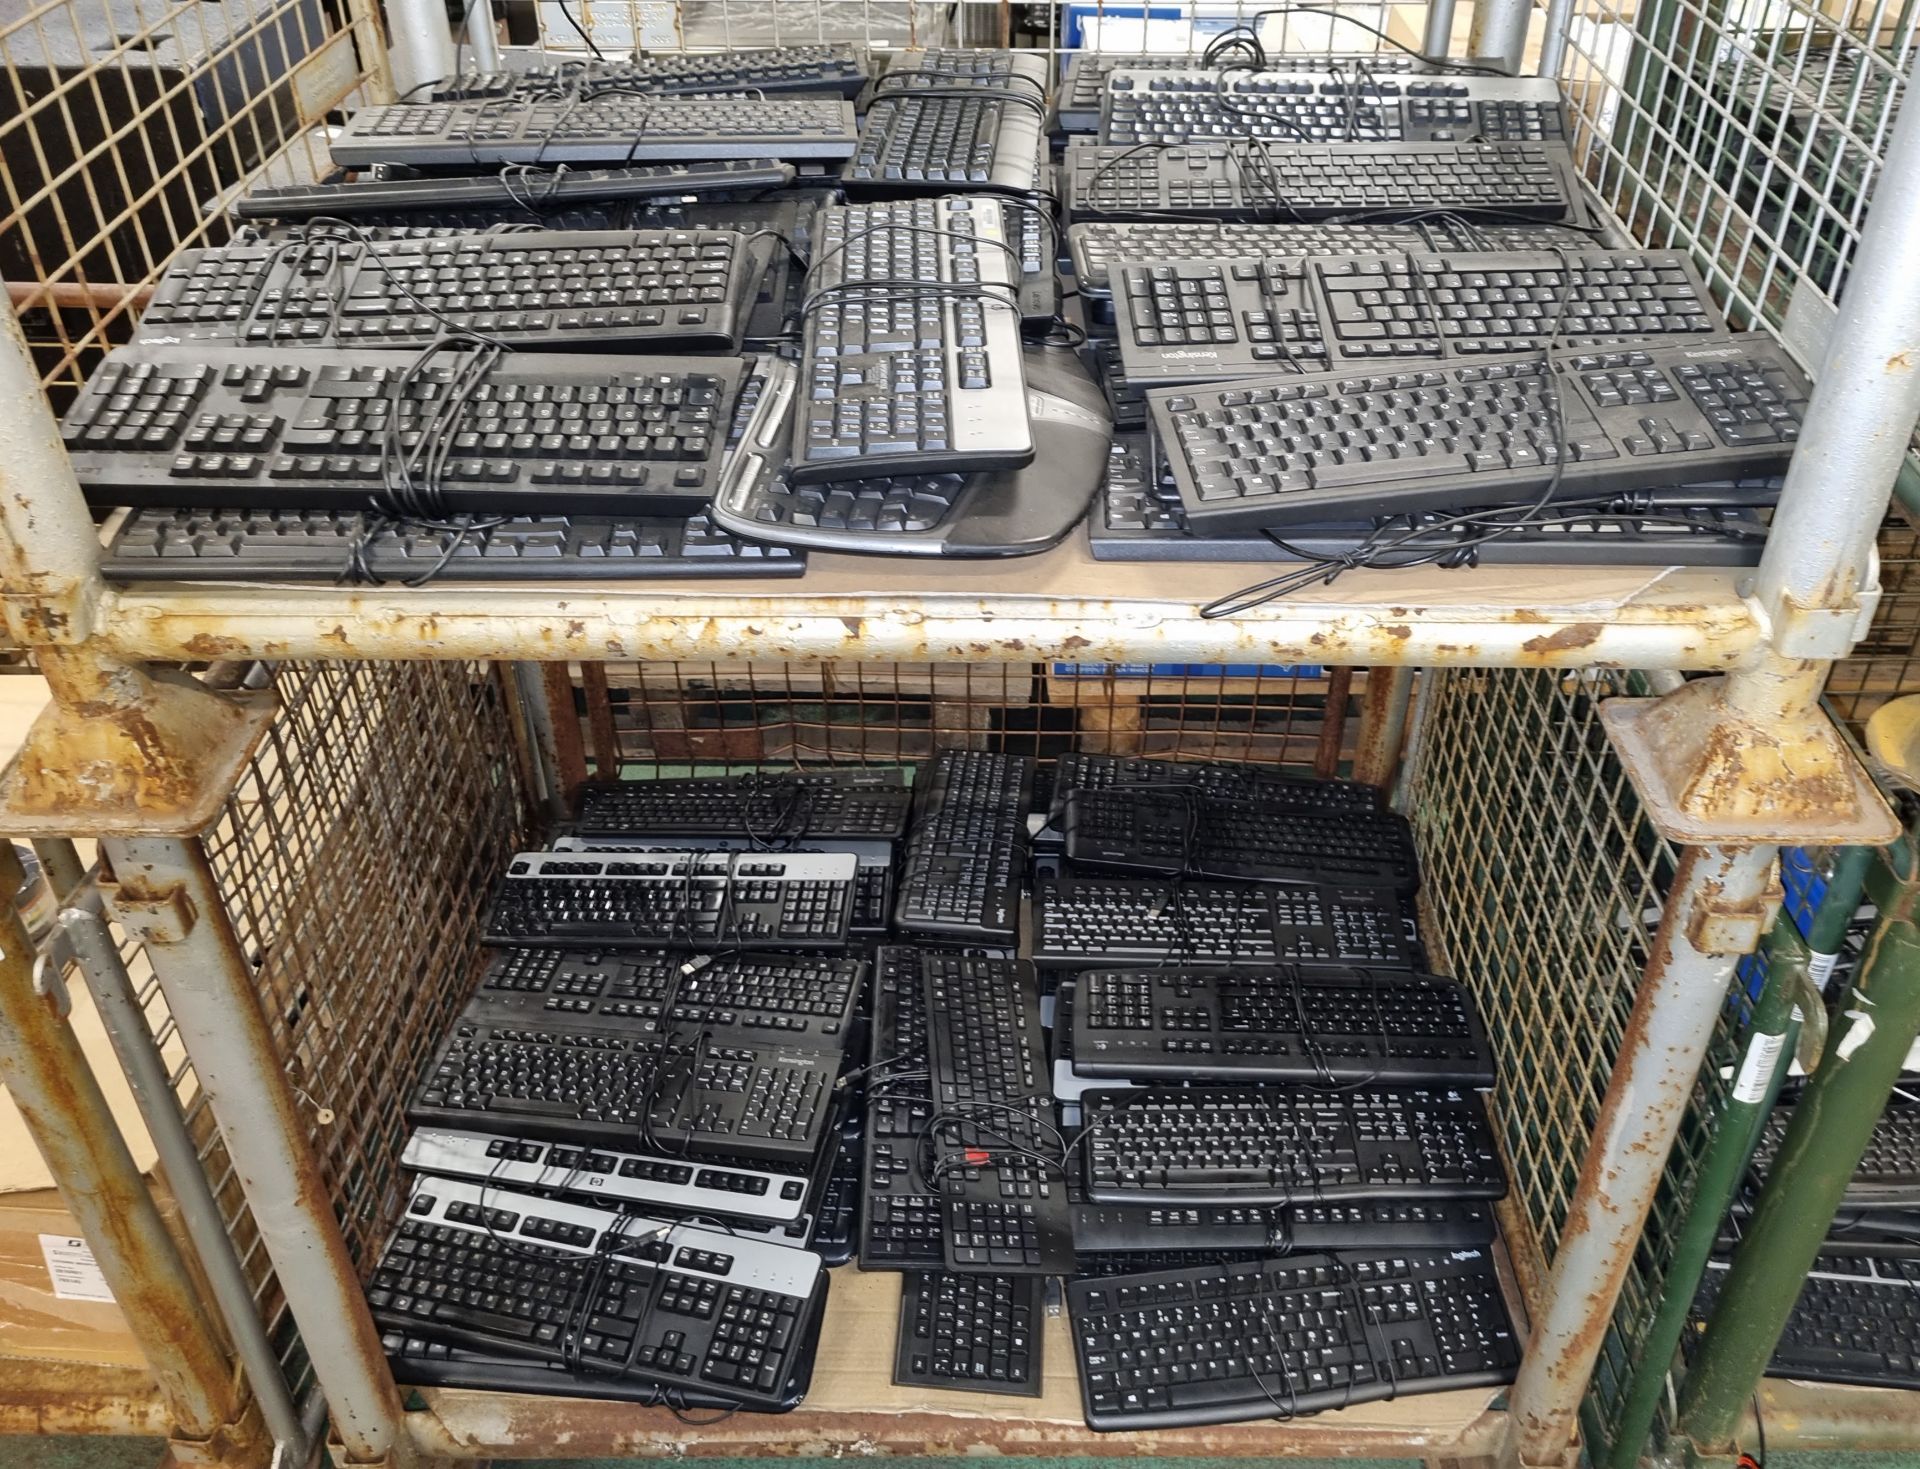 90x computer keyboards of multiple makes - HP, Logitech and Kensington